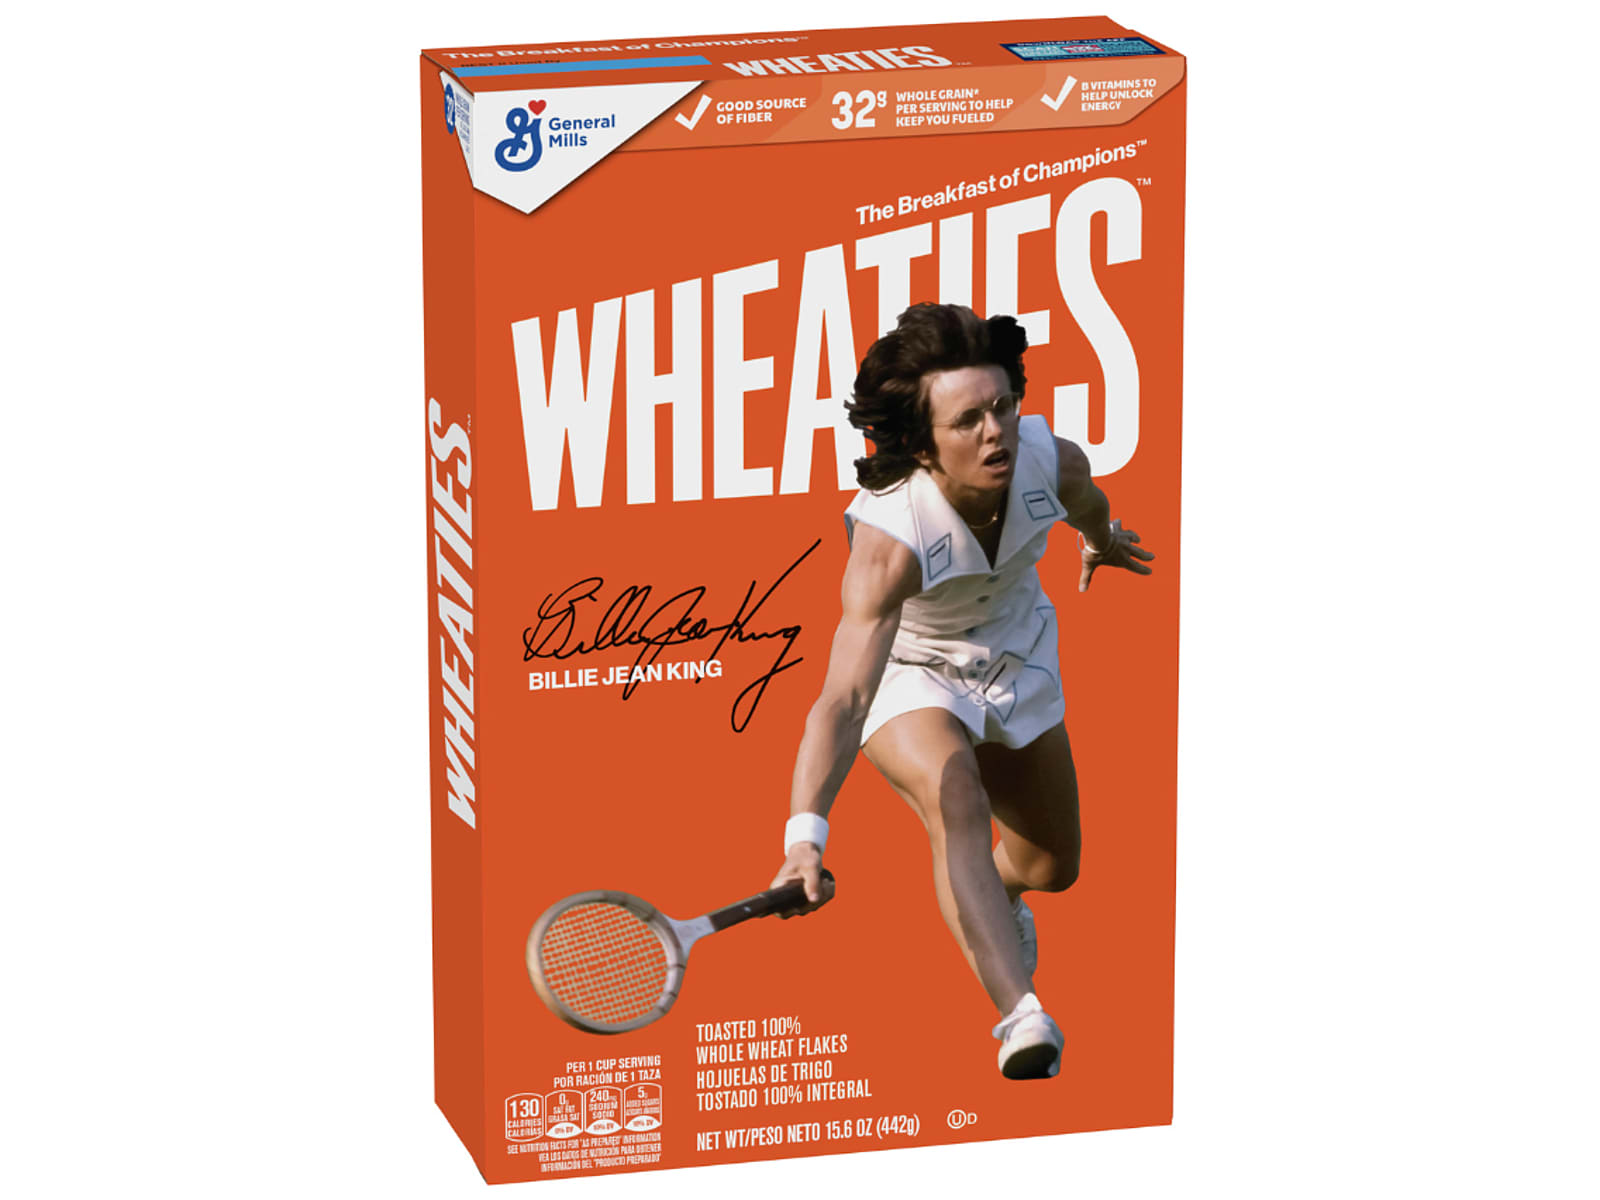 Billie Jean King makes her Wheaties Box debut celebrating her legacy as a trailblazer on and off the court with an iconic orange box.